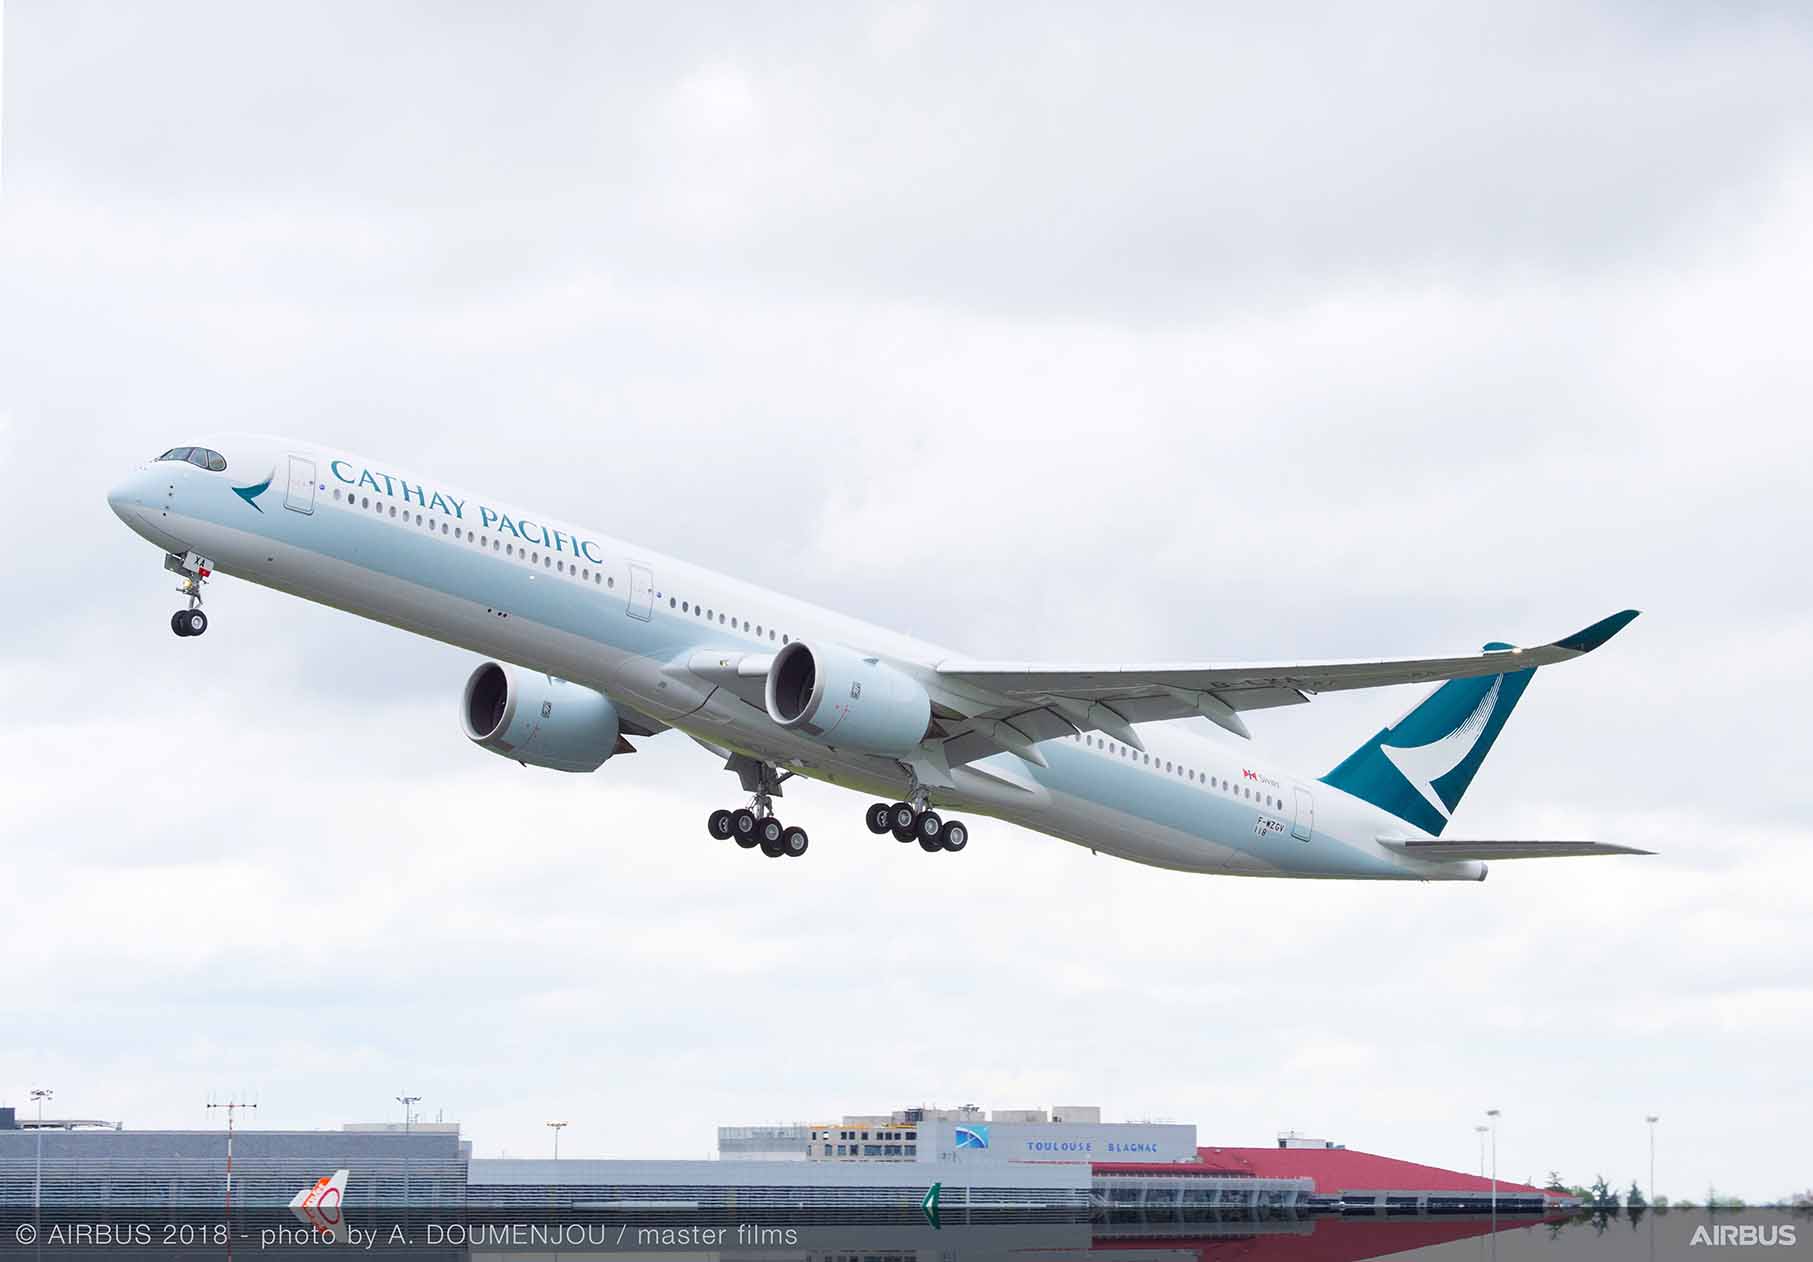 Cathay Pacific pilots found taxiing at lower speed, receive warning